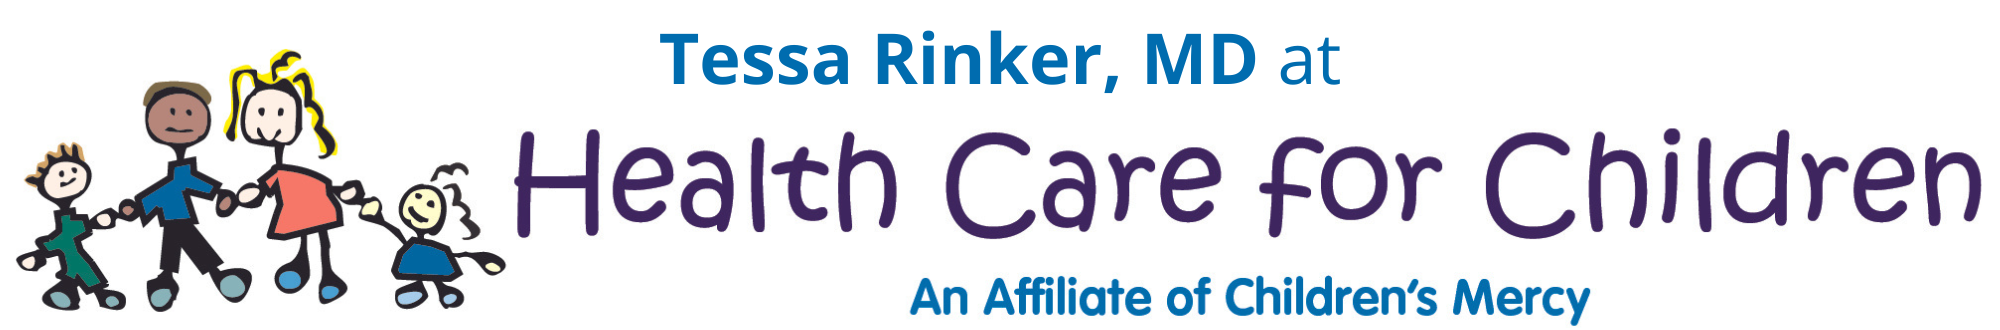 Tessa Rinker, MD at Health Care for Children.png